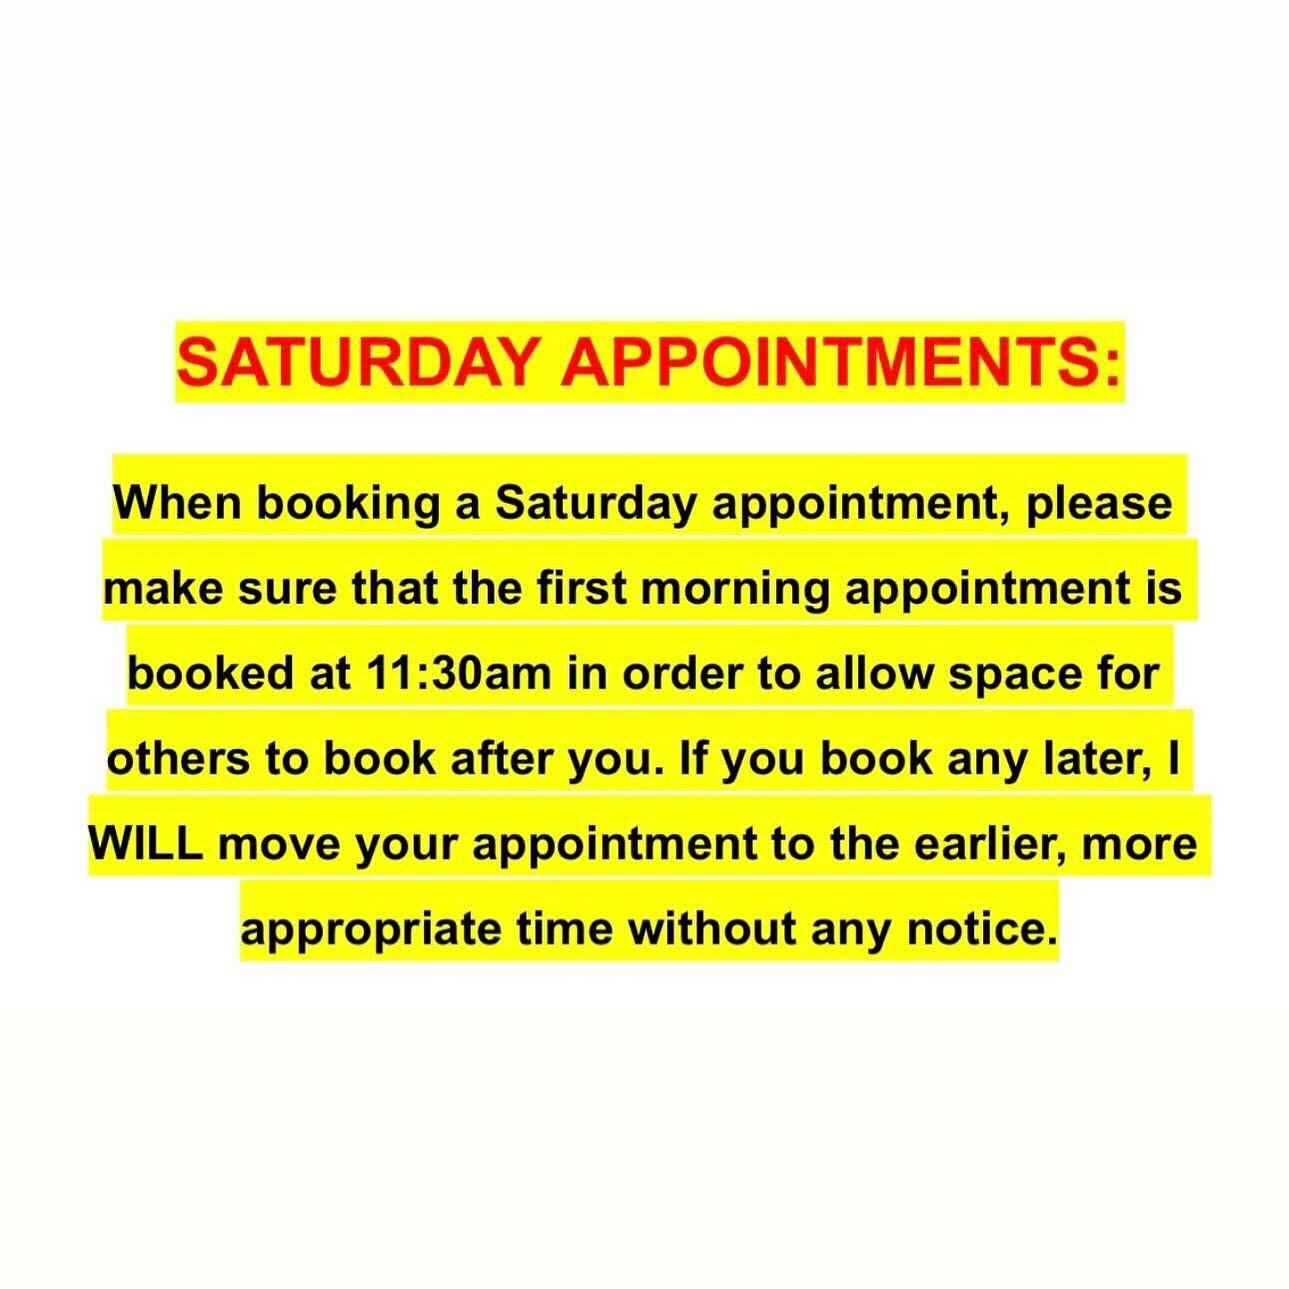 Good morning!!! 

As most know, NOVEMBER books will be opening today at 9:30am. I ask that if you are booking a Saturday appointment, and you see all times available, that you please book the 11:30am time slot so that the space is allowed for more th